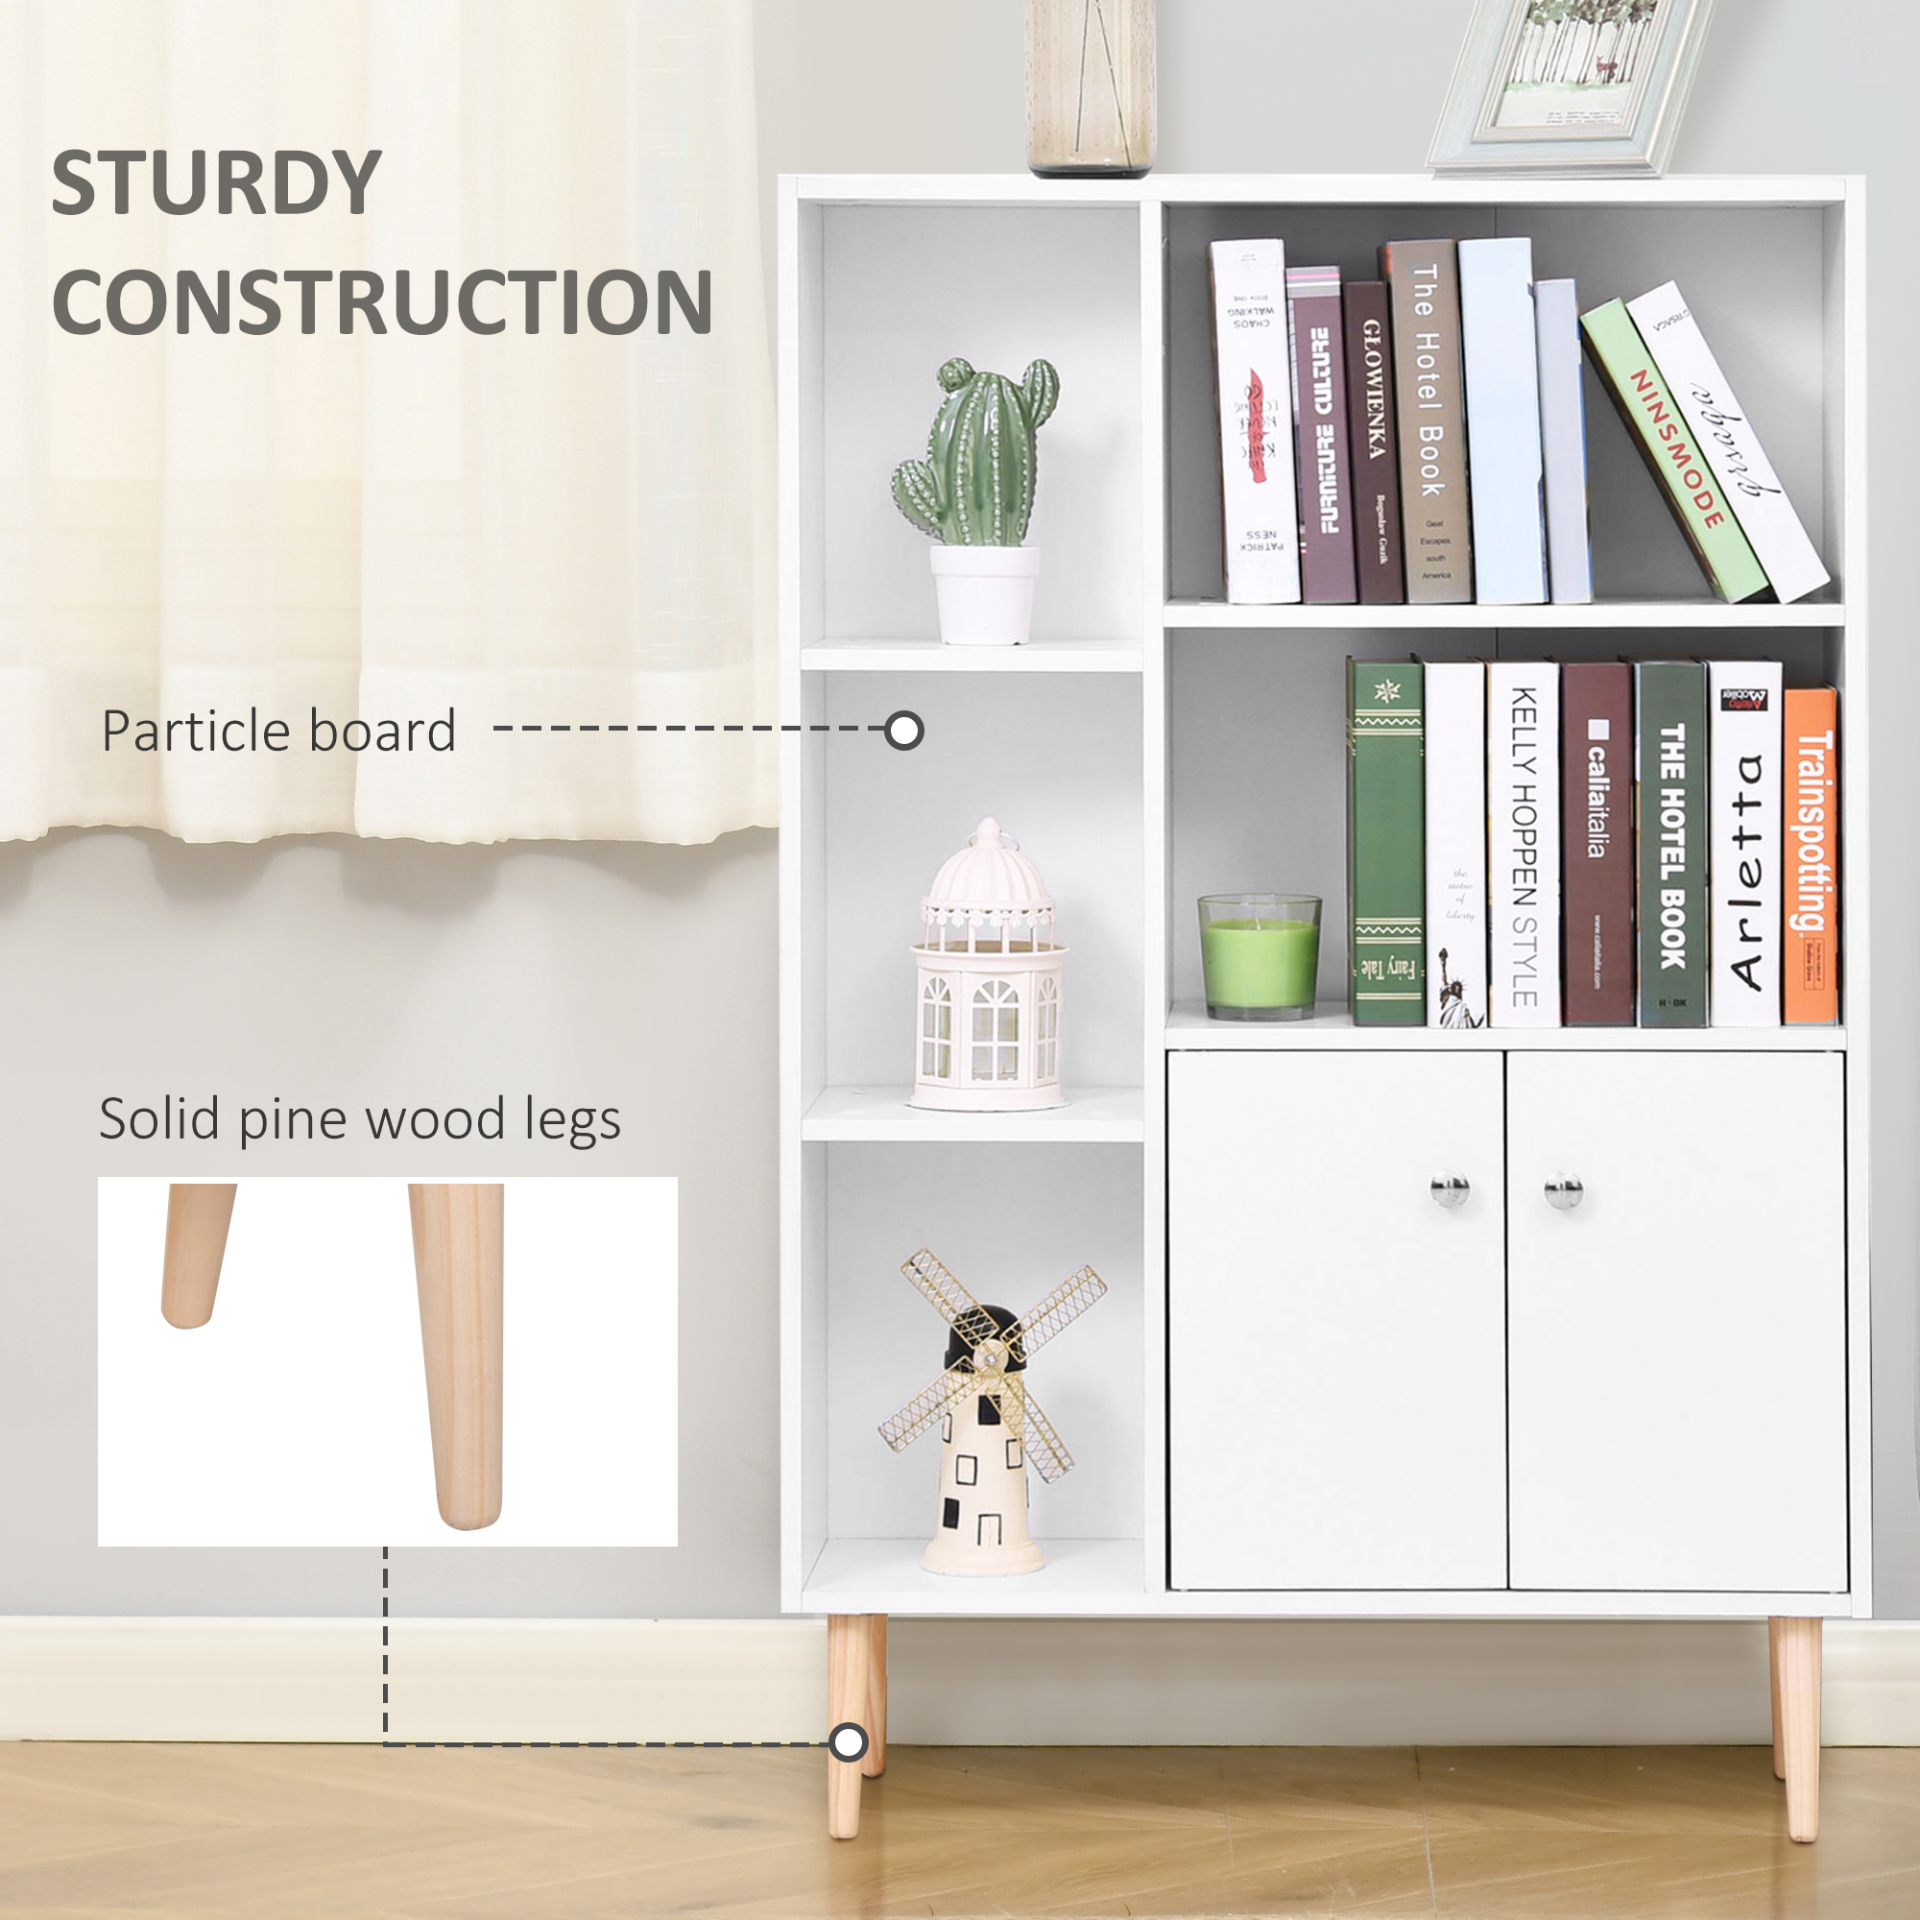 HOMCOM Open Bookcase Storage Cabinet Shelves Unit Free Standing w/ Two Doors Wooden Display White